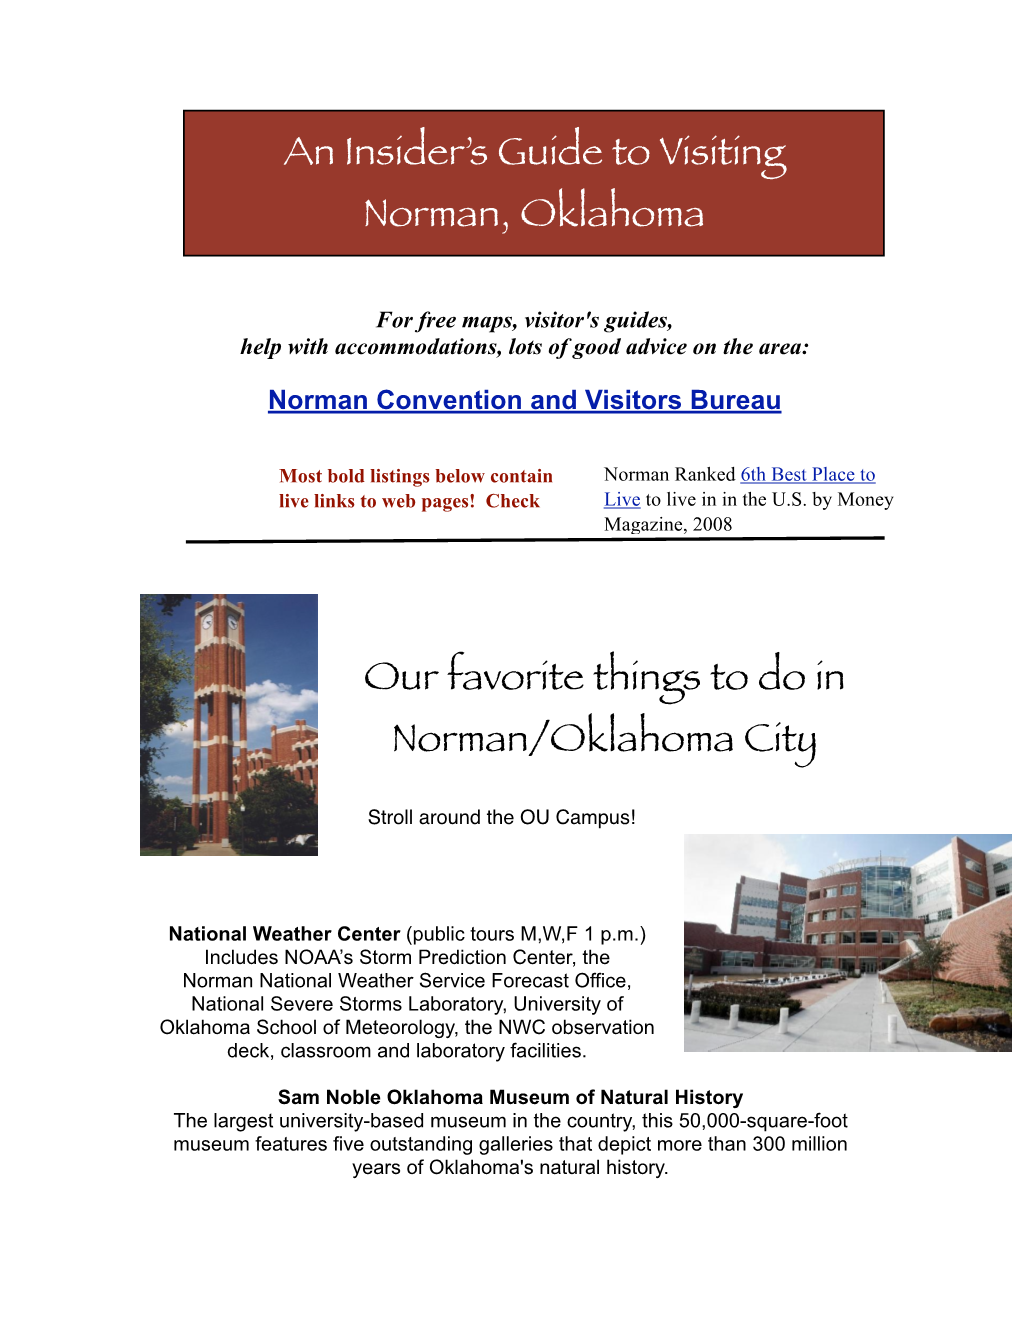 Top Things to Do in Norman